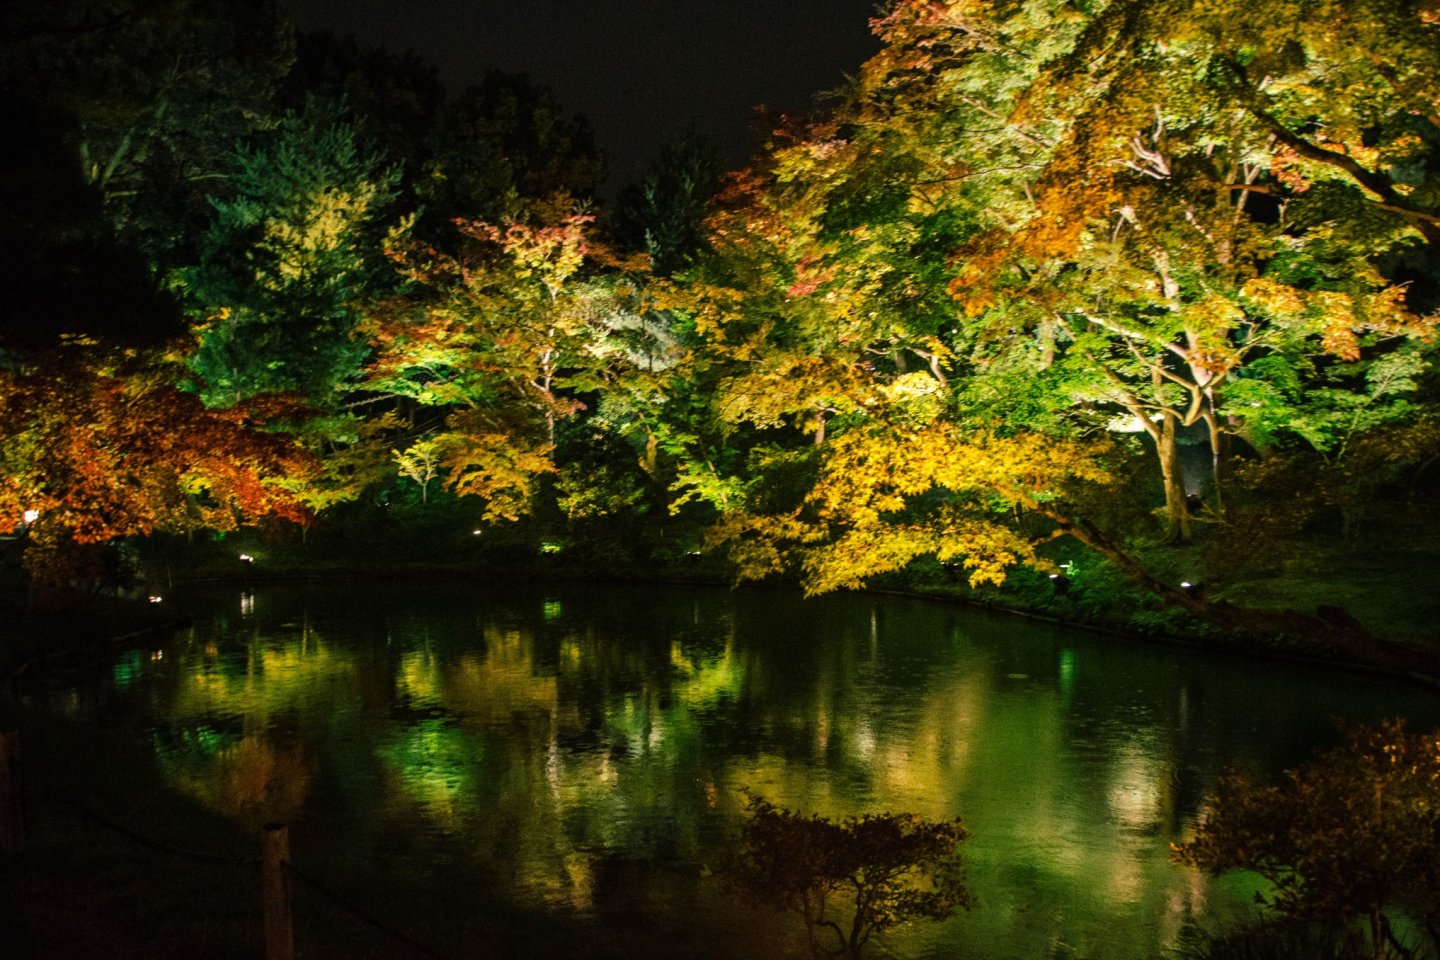 Reflections of the lights in the pond beside Kodai-ji Temple.